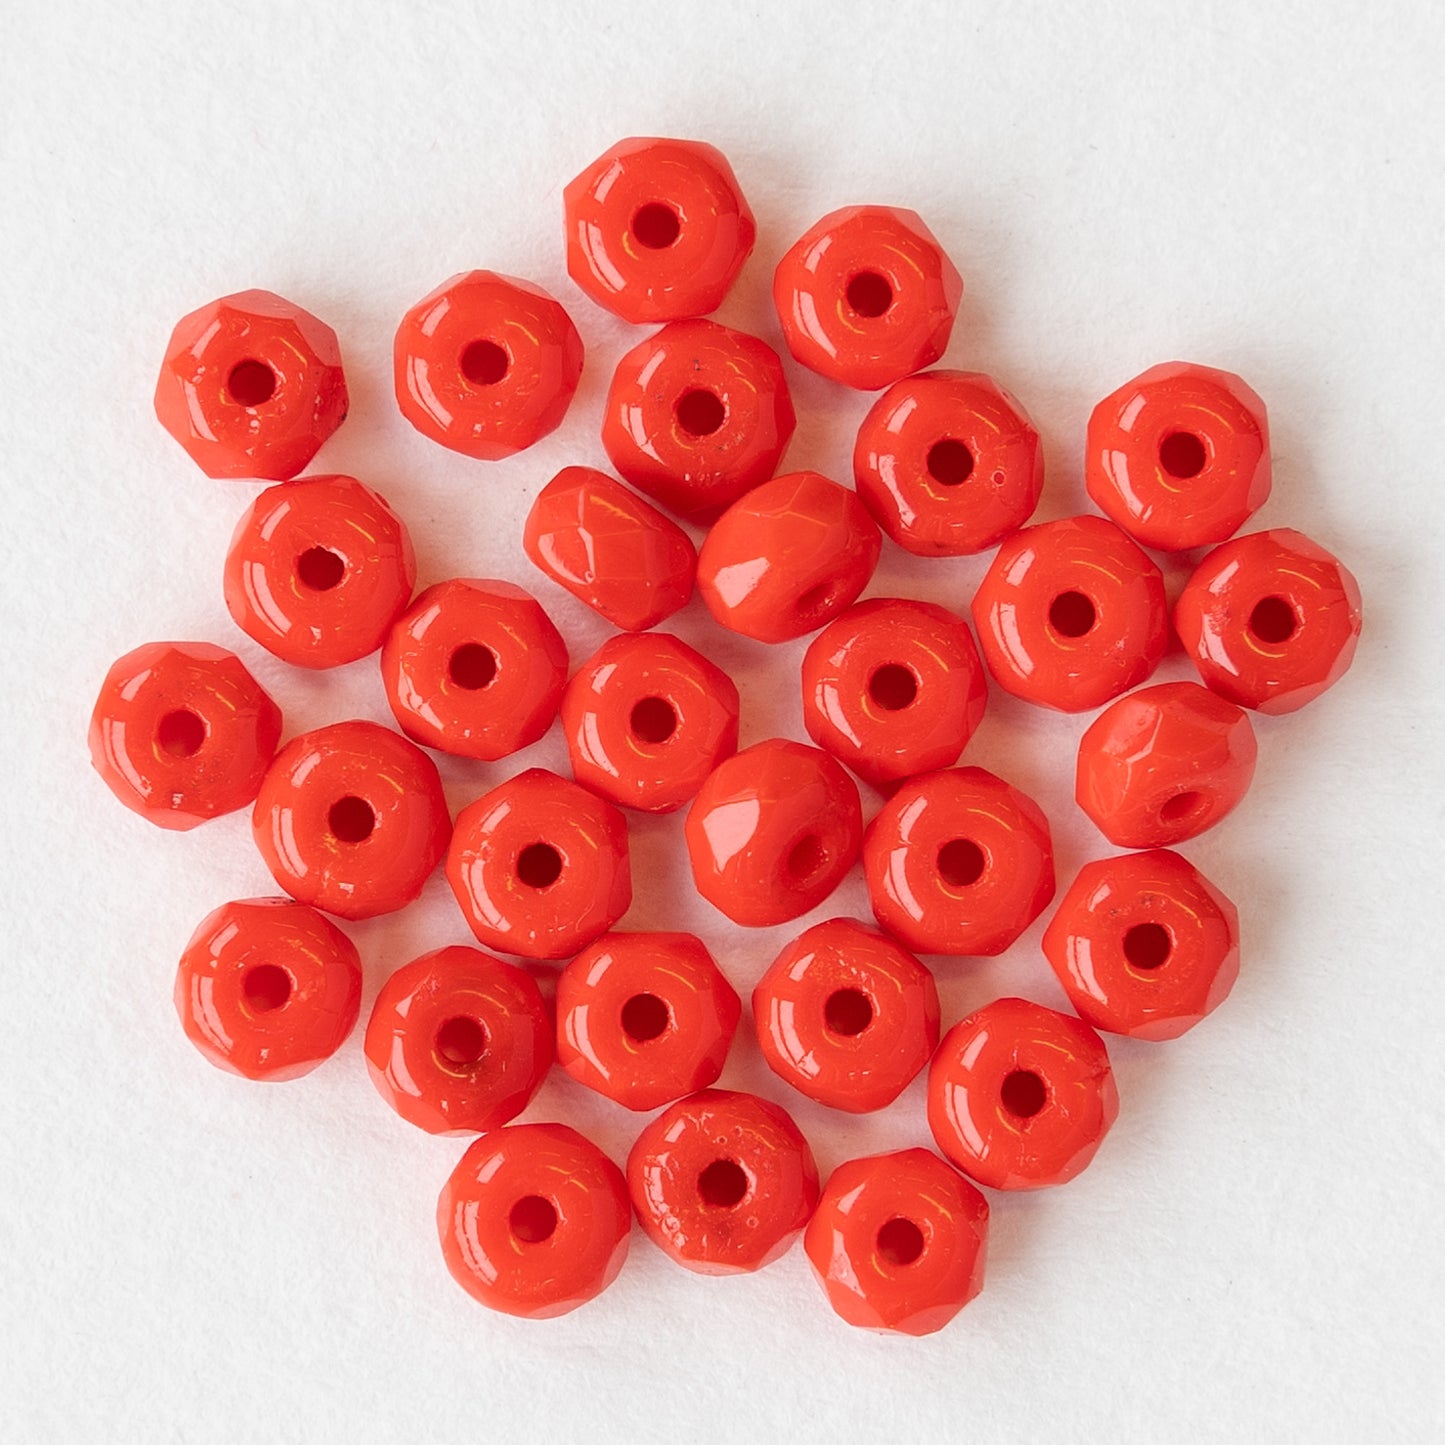 3x5mm Rondelle - Coral Red - 50 beads